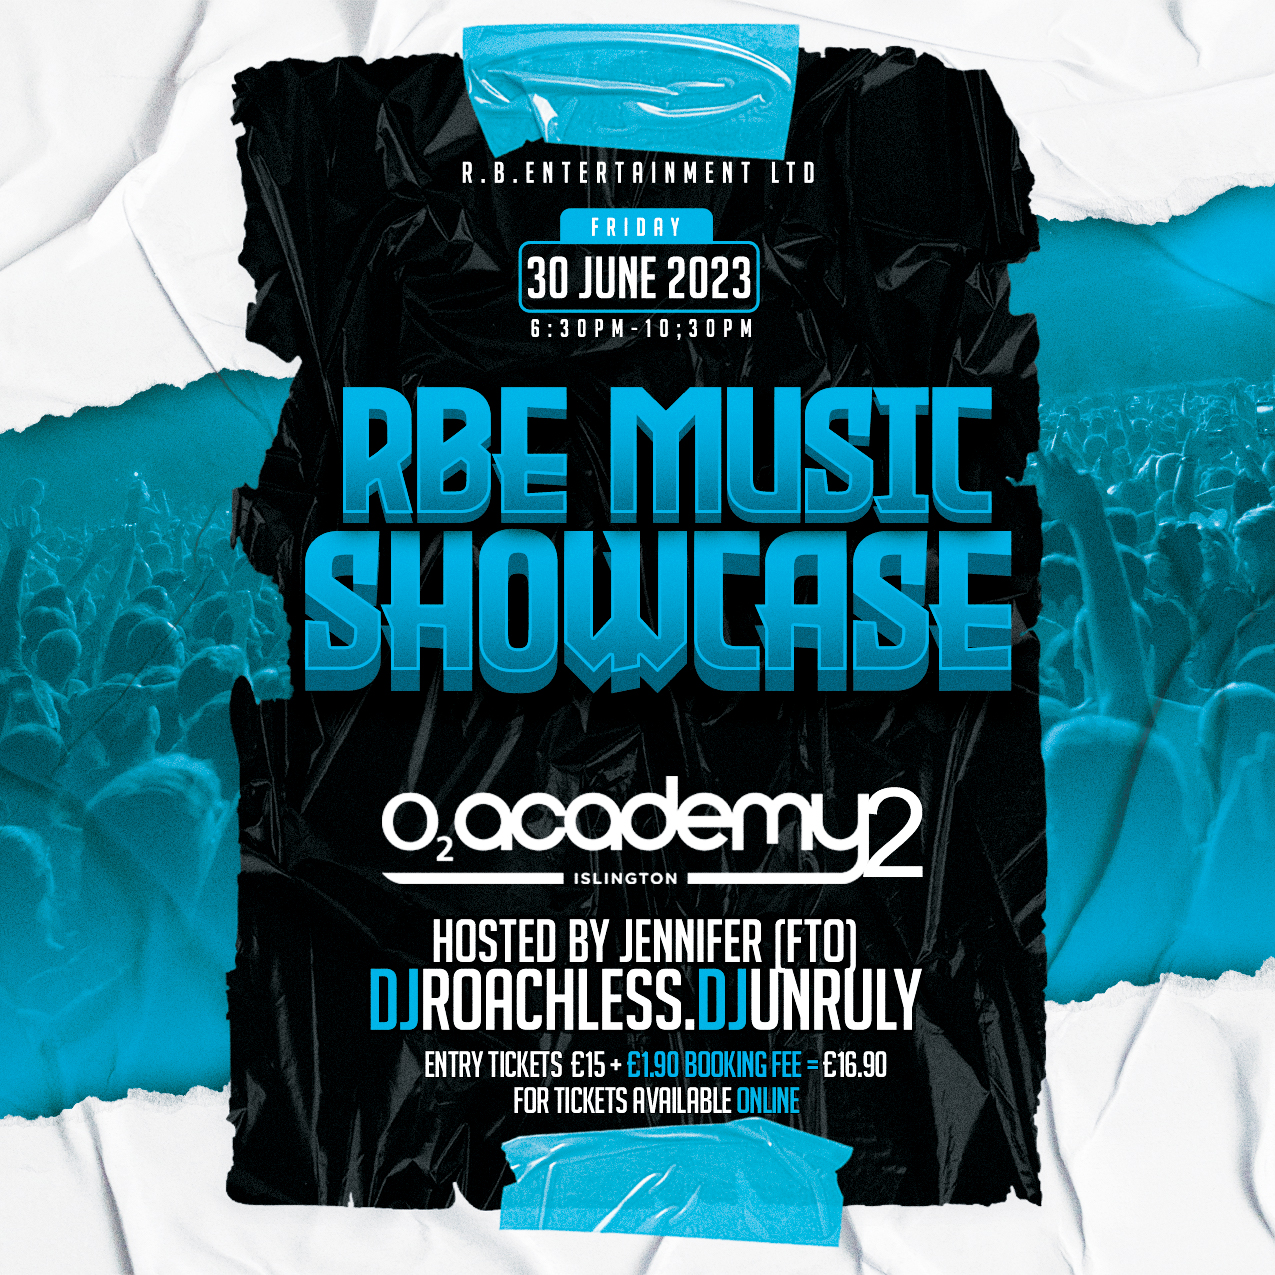 RBE Music Showcase at the o2 Academy2 Islington, London 30th of June 2023